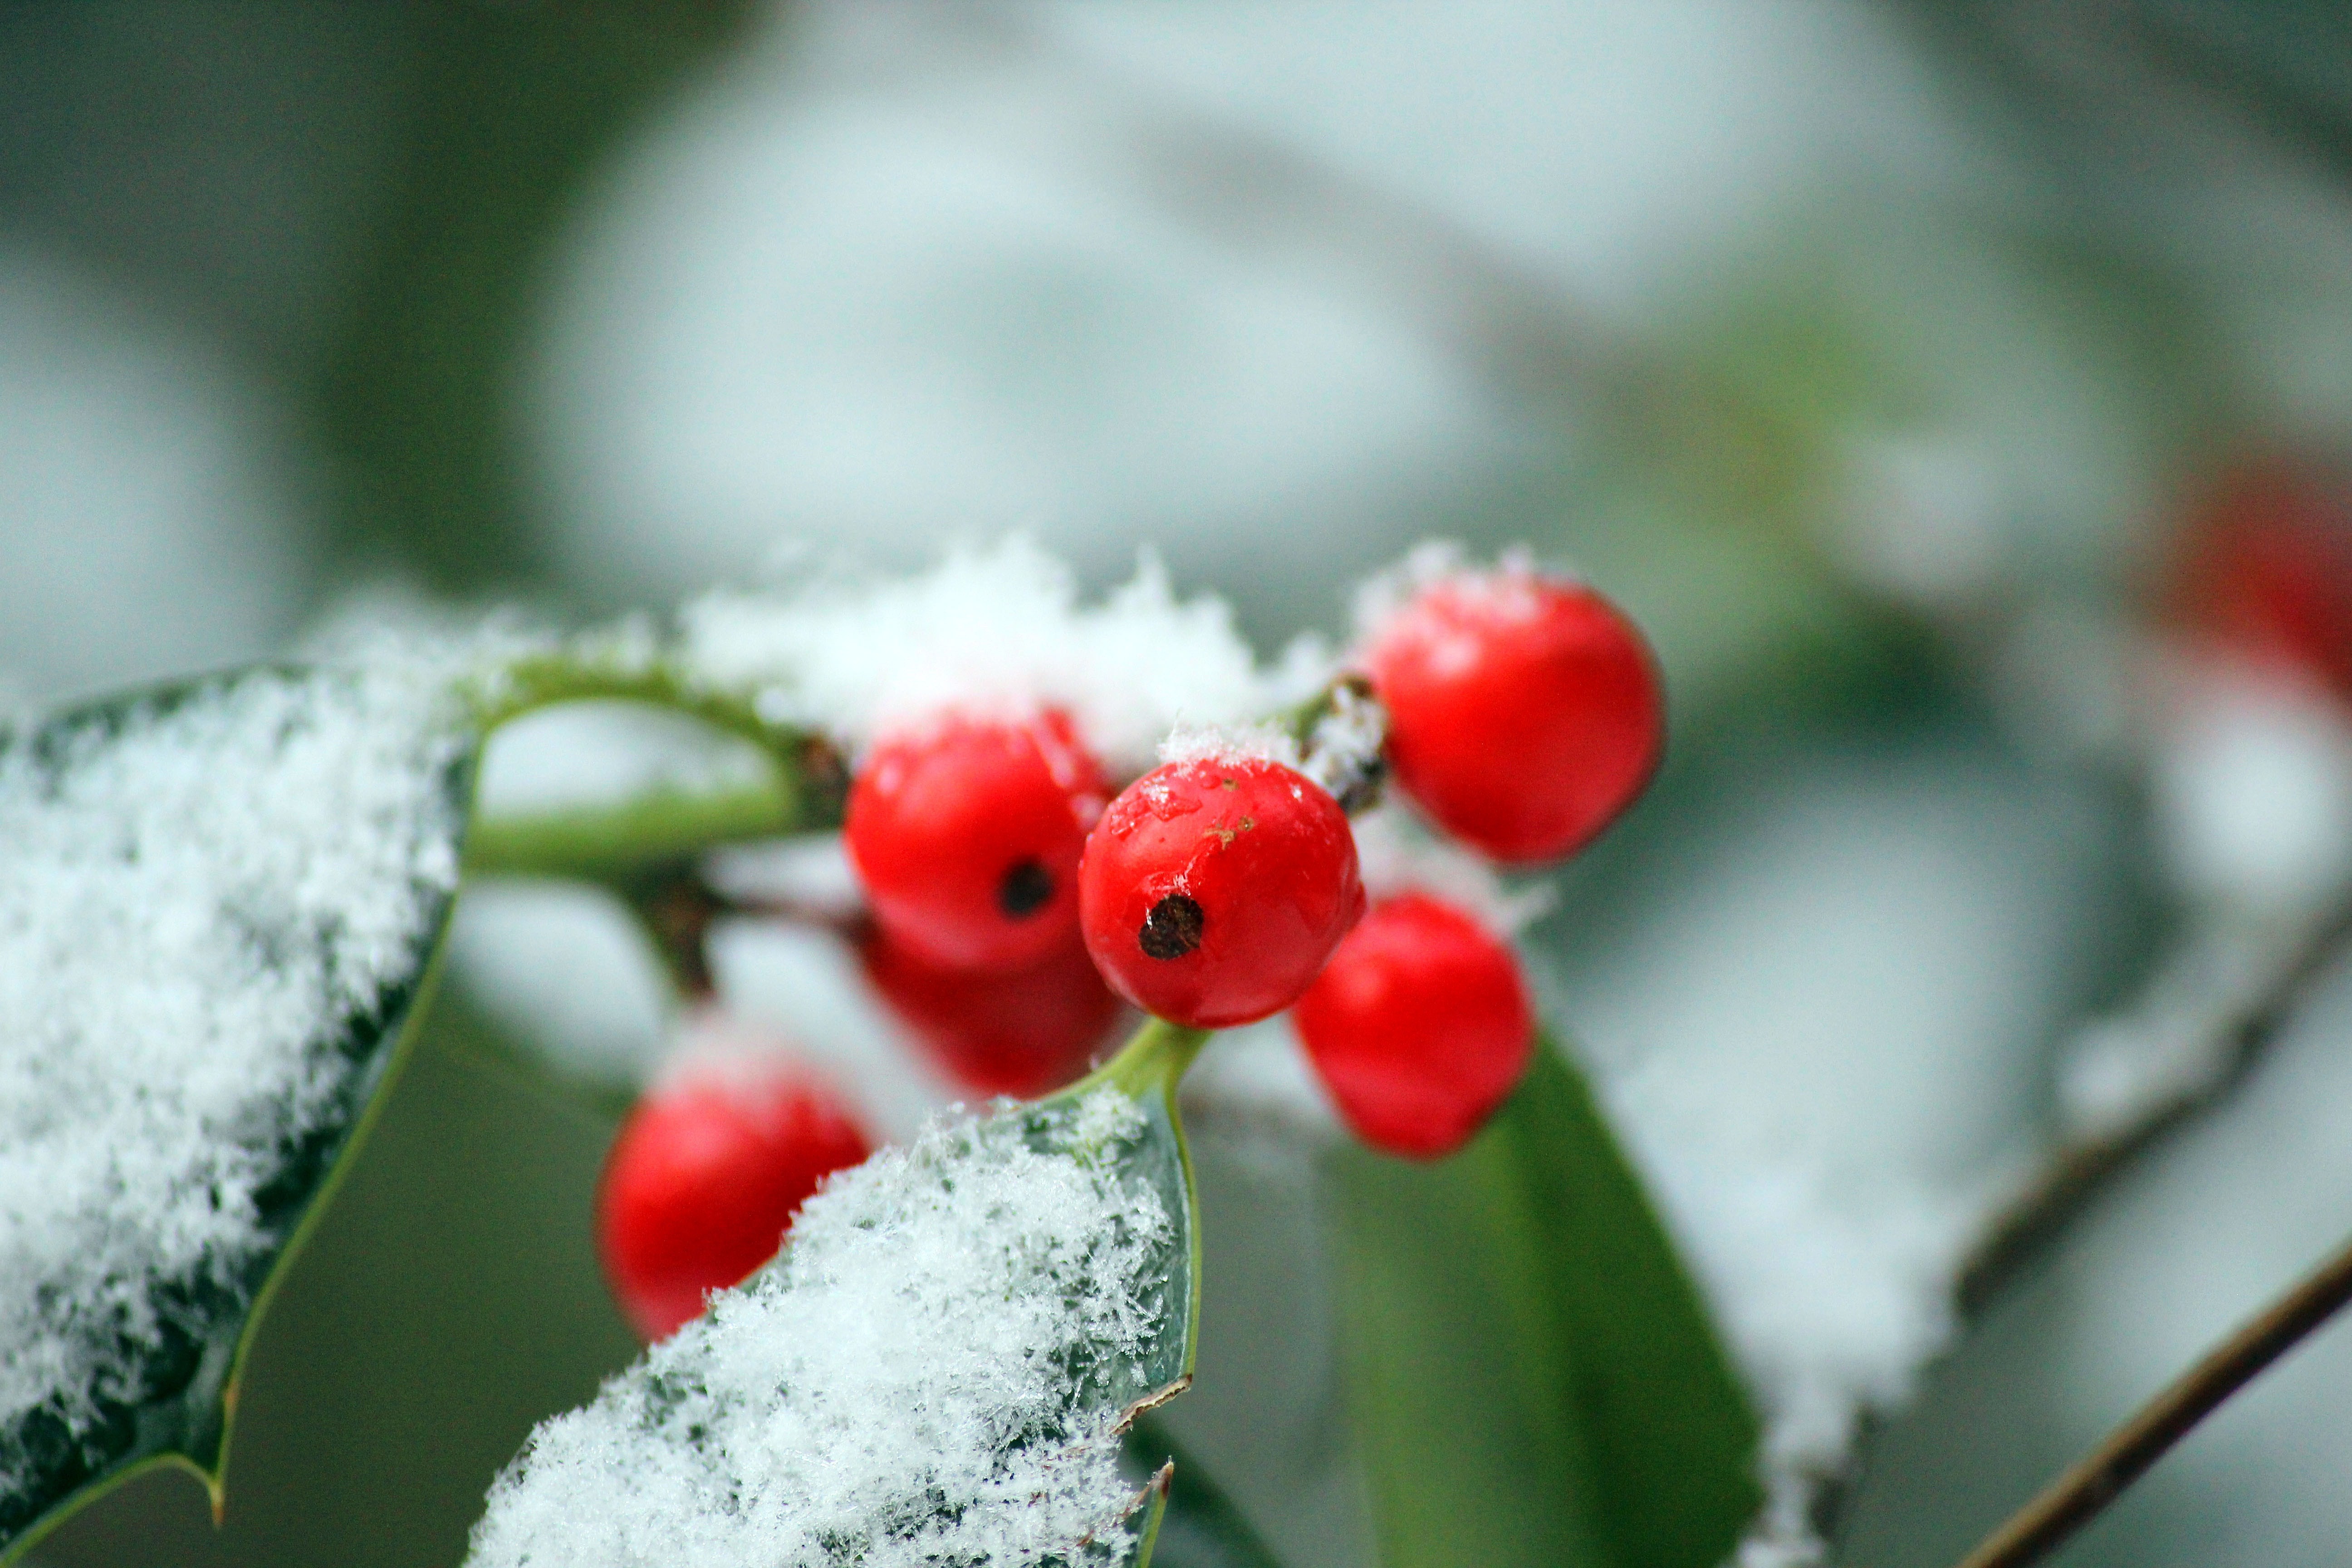 Several bright red berries clustered near green leaves that are covered in fresh white snow.